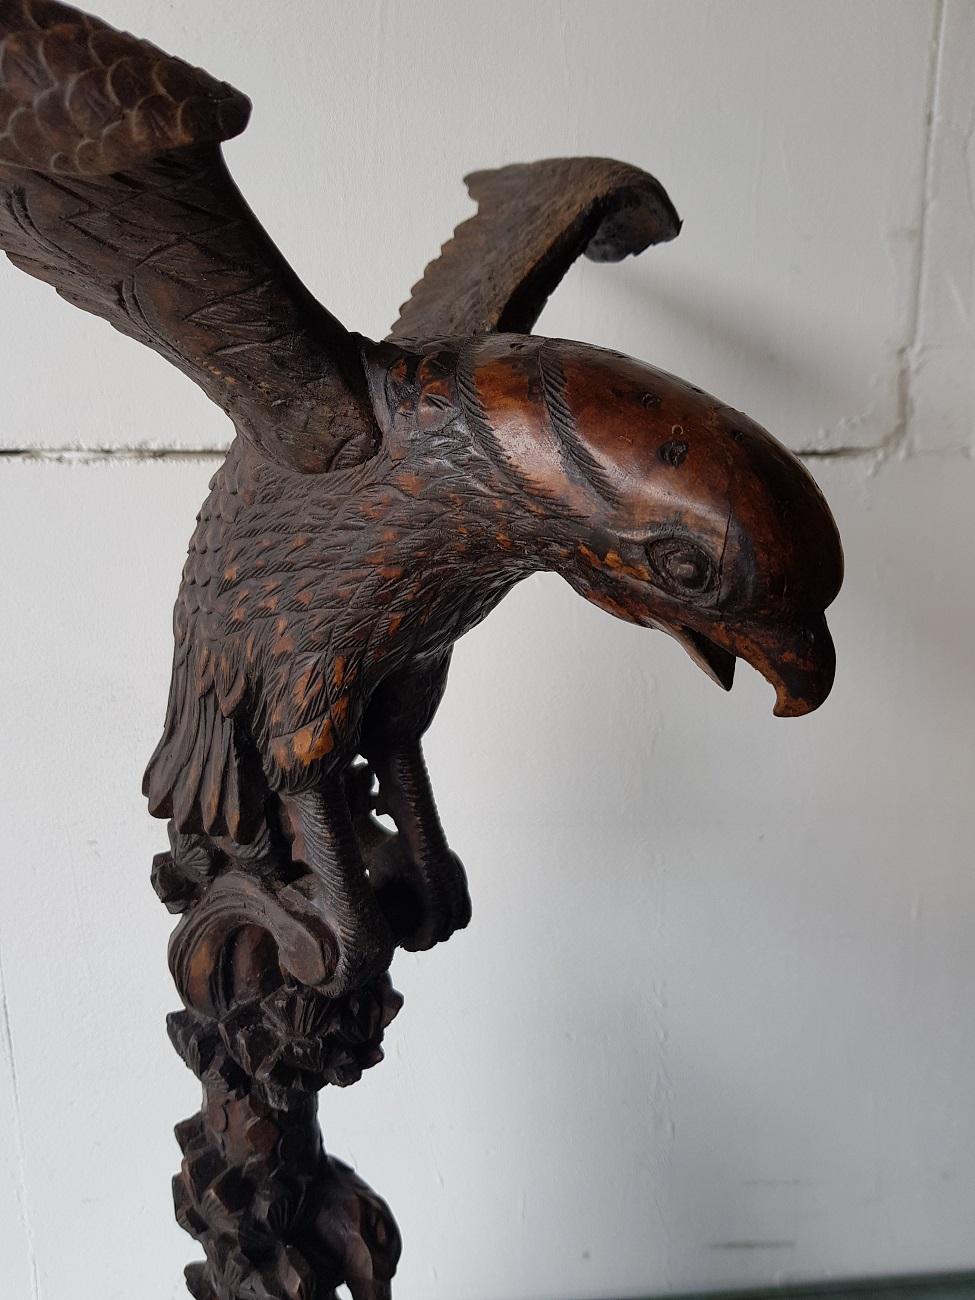 Old Asian wooden sculpture of an eagle standing on a tree trunk with vegetation (restoration of head and wings), 19th-20th century.

The measurements are,
Depth 24 cm/ 9.4 inch.
Width 37.5 cm/ 14.7 inch.
Height 64.5 cm/ 25.3 inch.
     